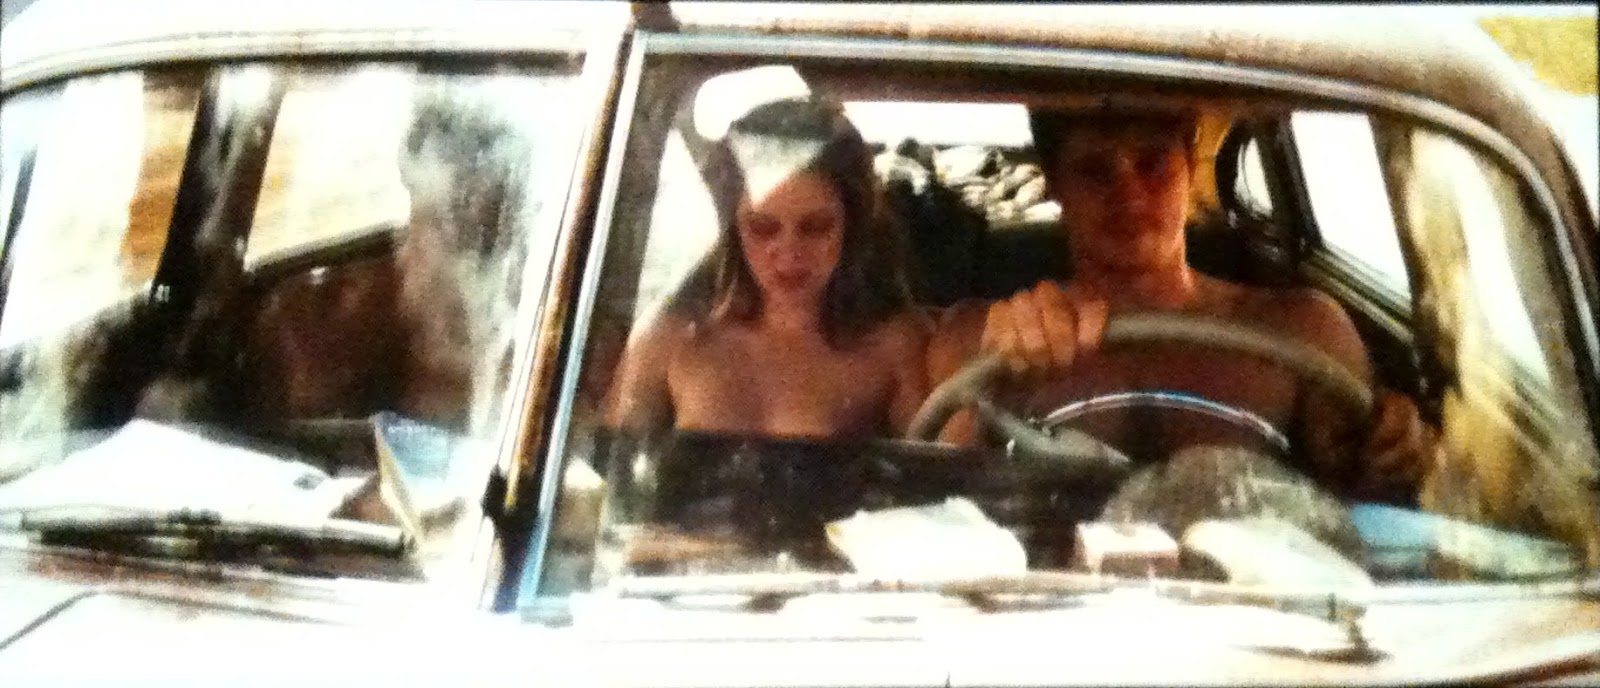 Kristen Stewart Topless And Sex Scenes In Her New Film "On The Road&qu...